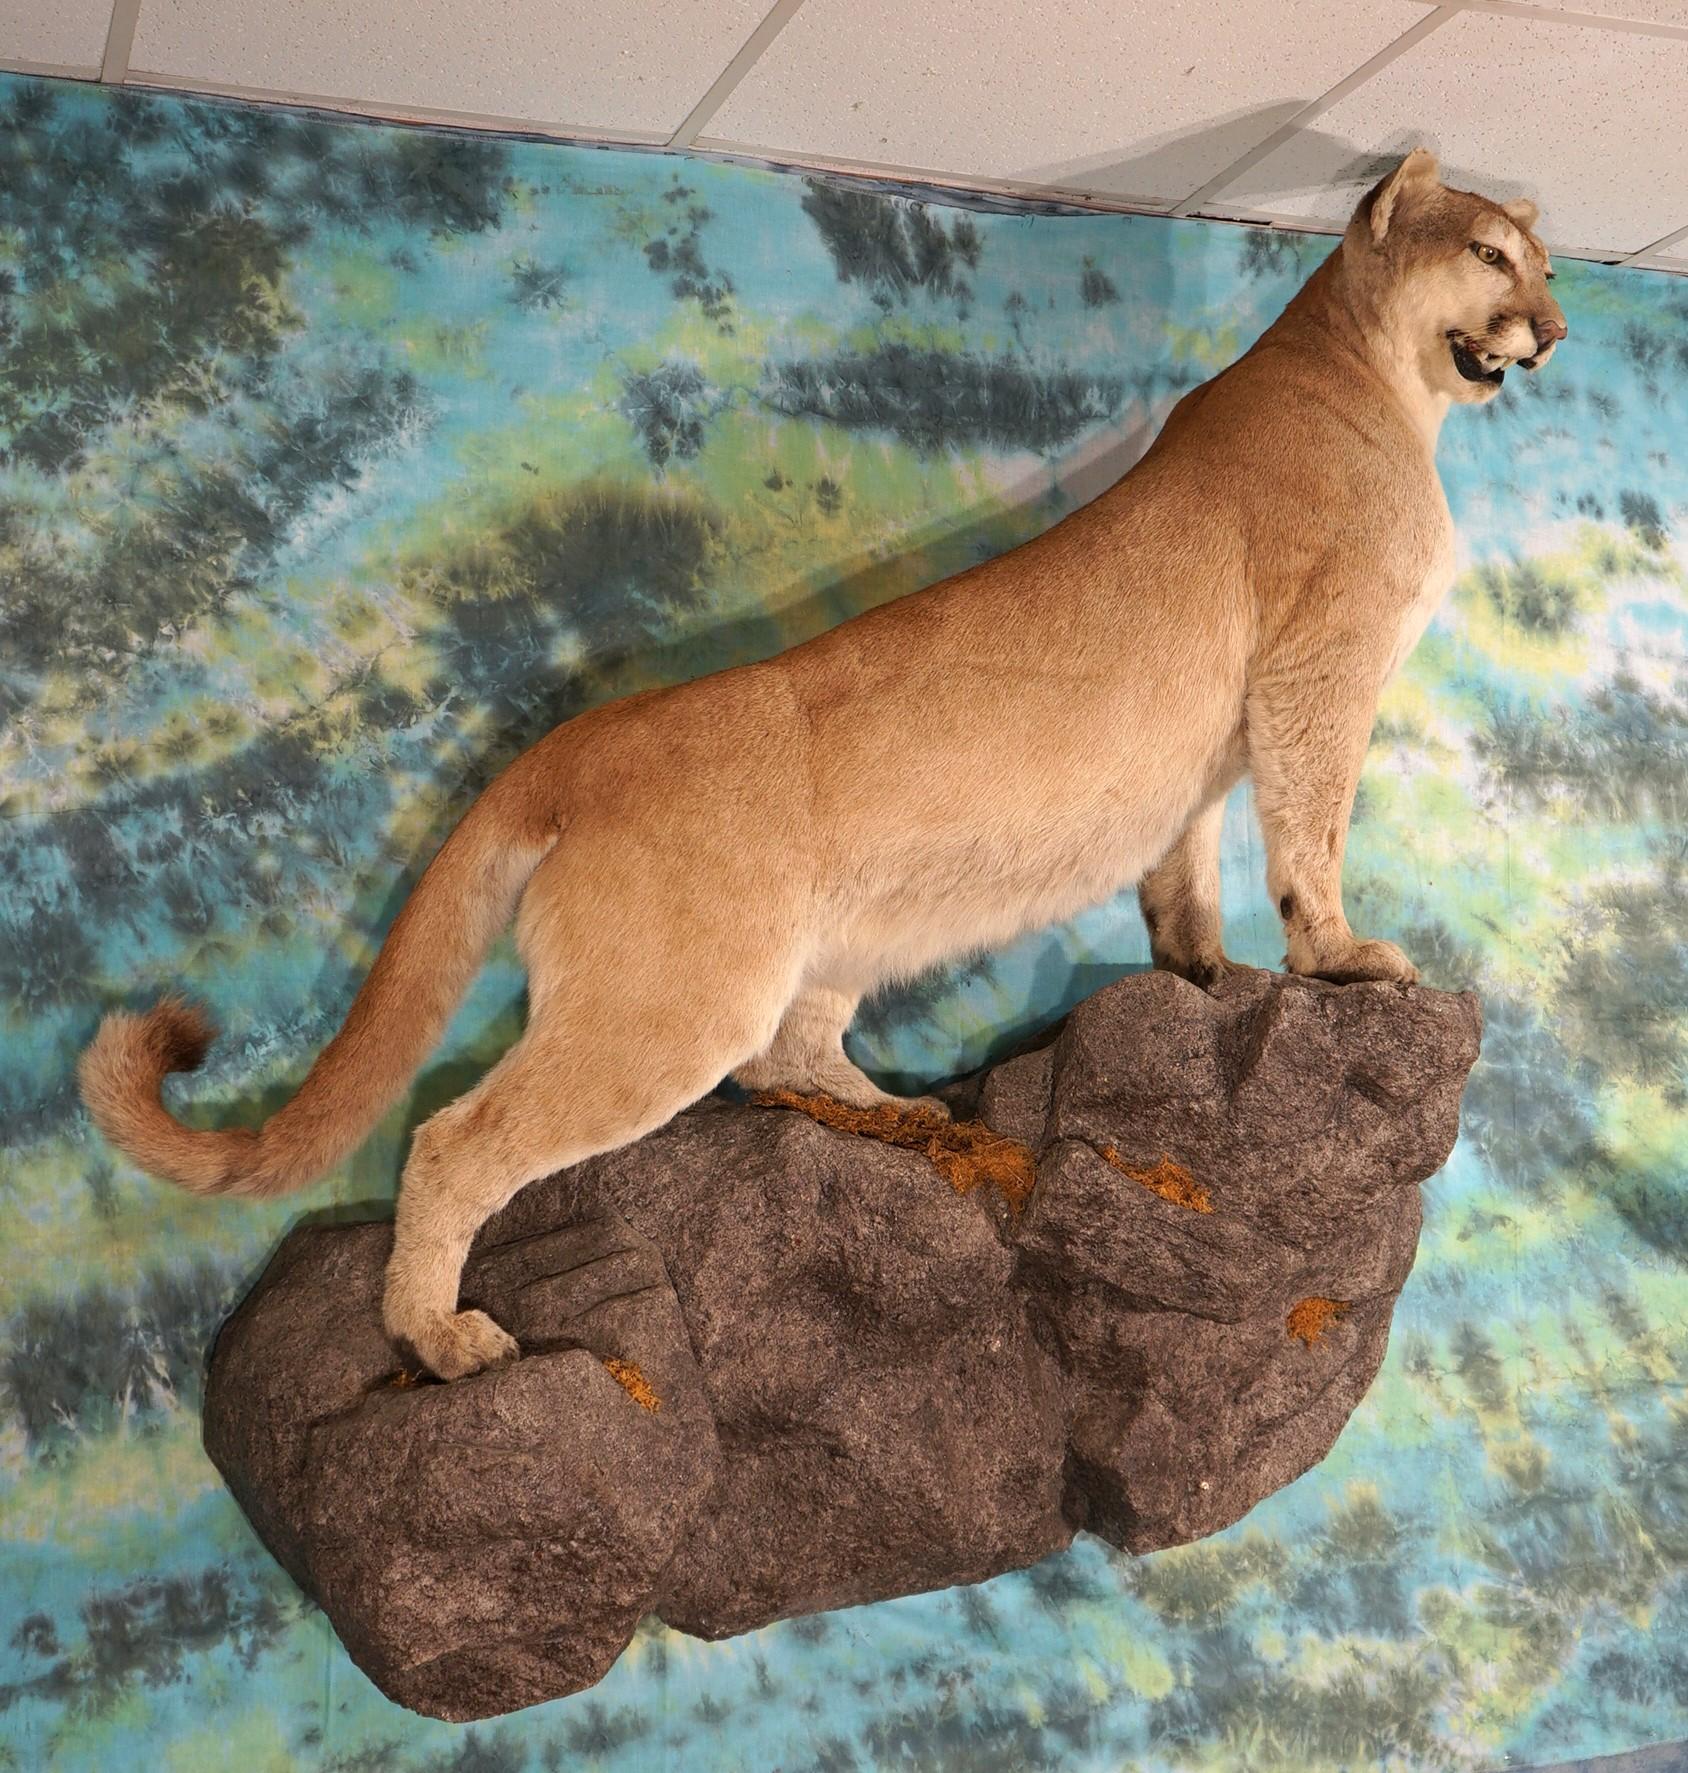 Extra Large Mountain Lion Full Body Taxidermy Mount